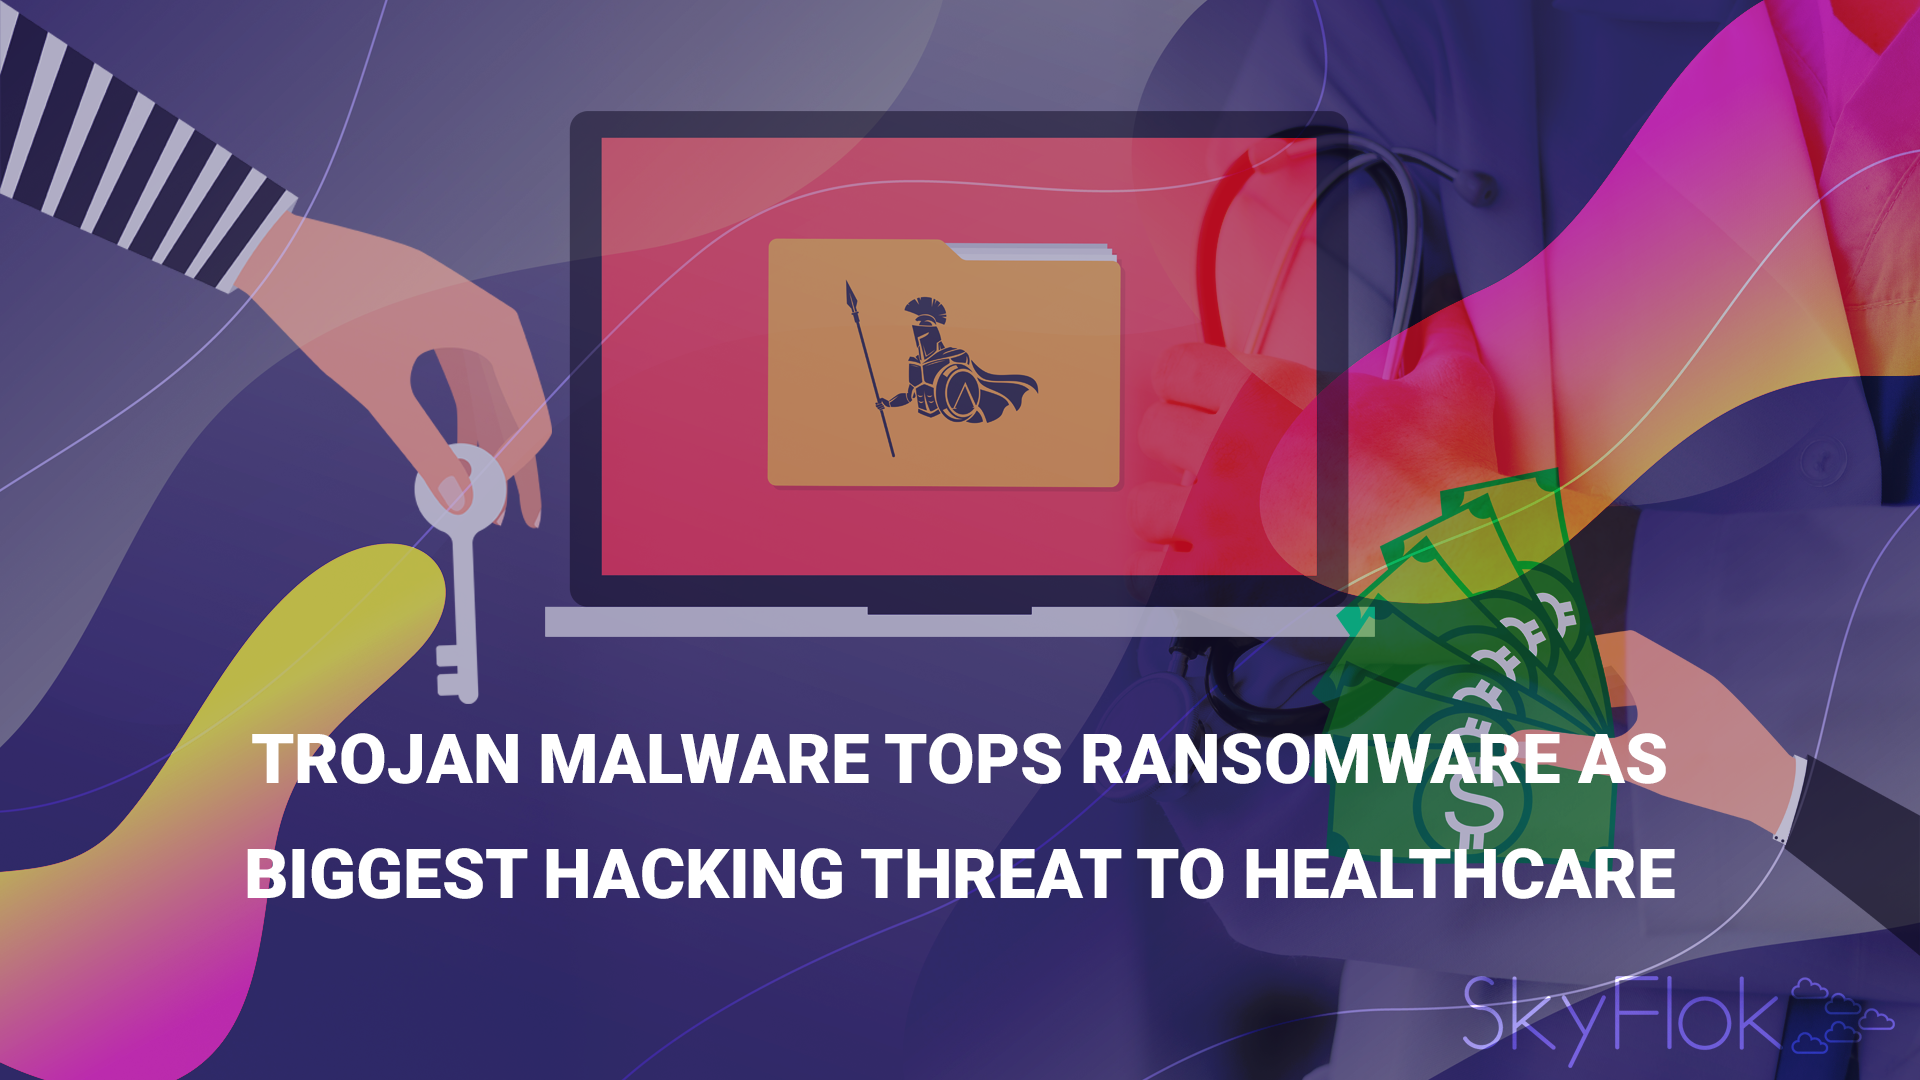 You are currently viewing Trojan Malware Tops Ransomware as Biggest Hacking Threat to Healthcare